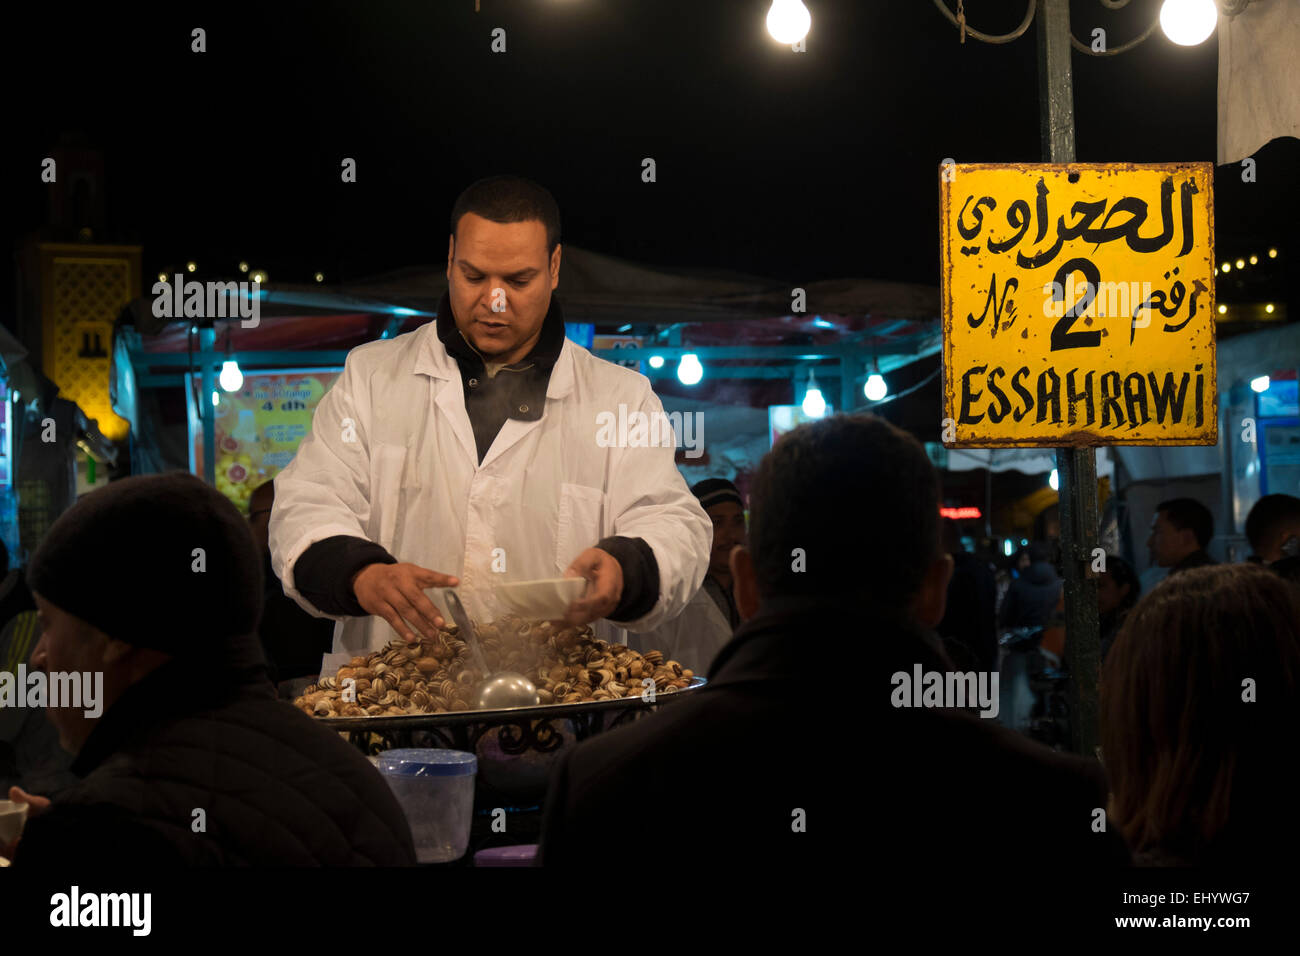 Food stall selling snails, Djemma el-Fna, Medina, old town, Marrakesh, Marrakech, Morocco, North Africa Stock Photo